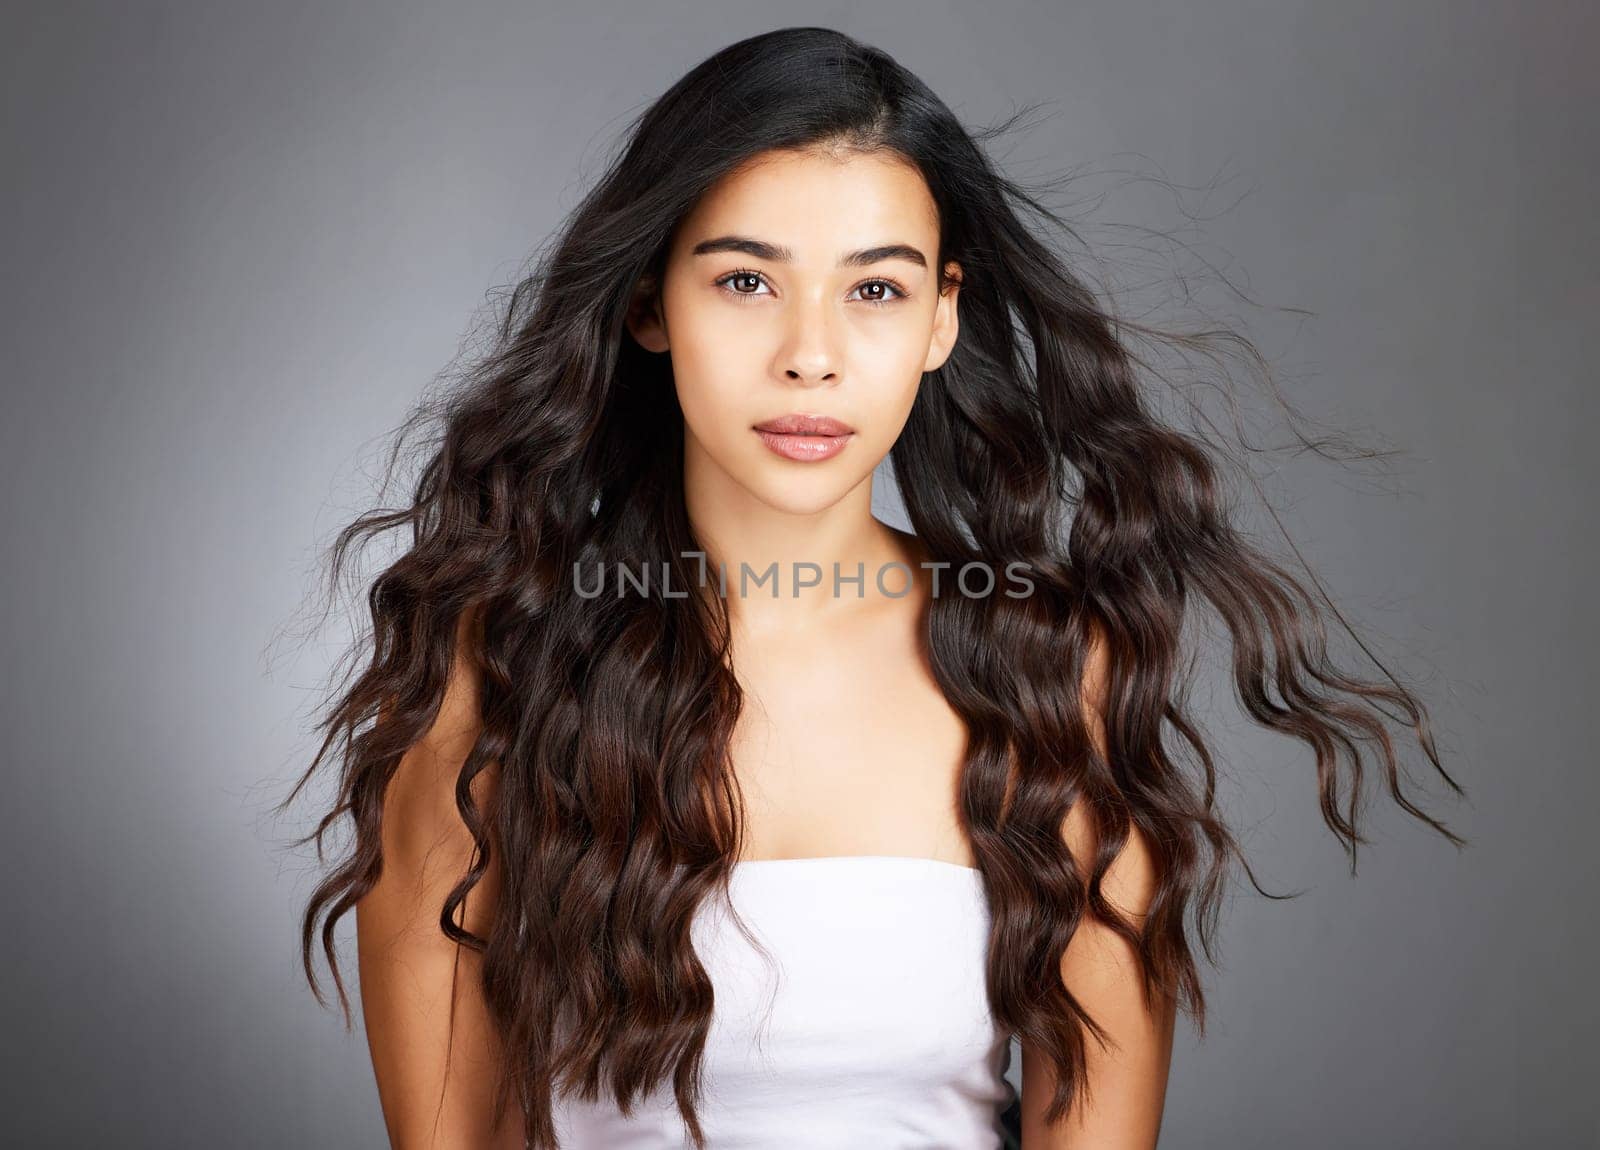 Hair, hair care and woman, face and beauty, glow and shine with keratin treatment. Cosmetic mockup, waves and texture with hair style with studio background. Wellness, self care portrait and growth